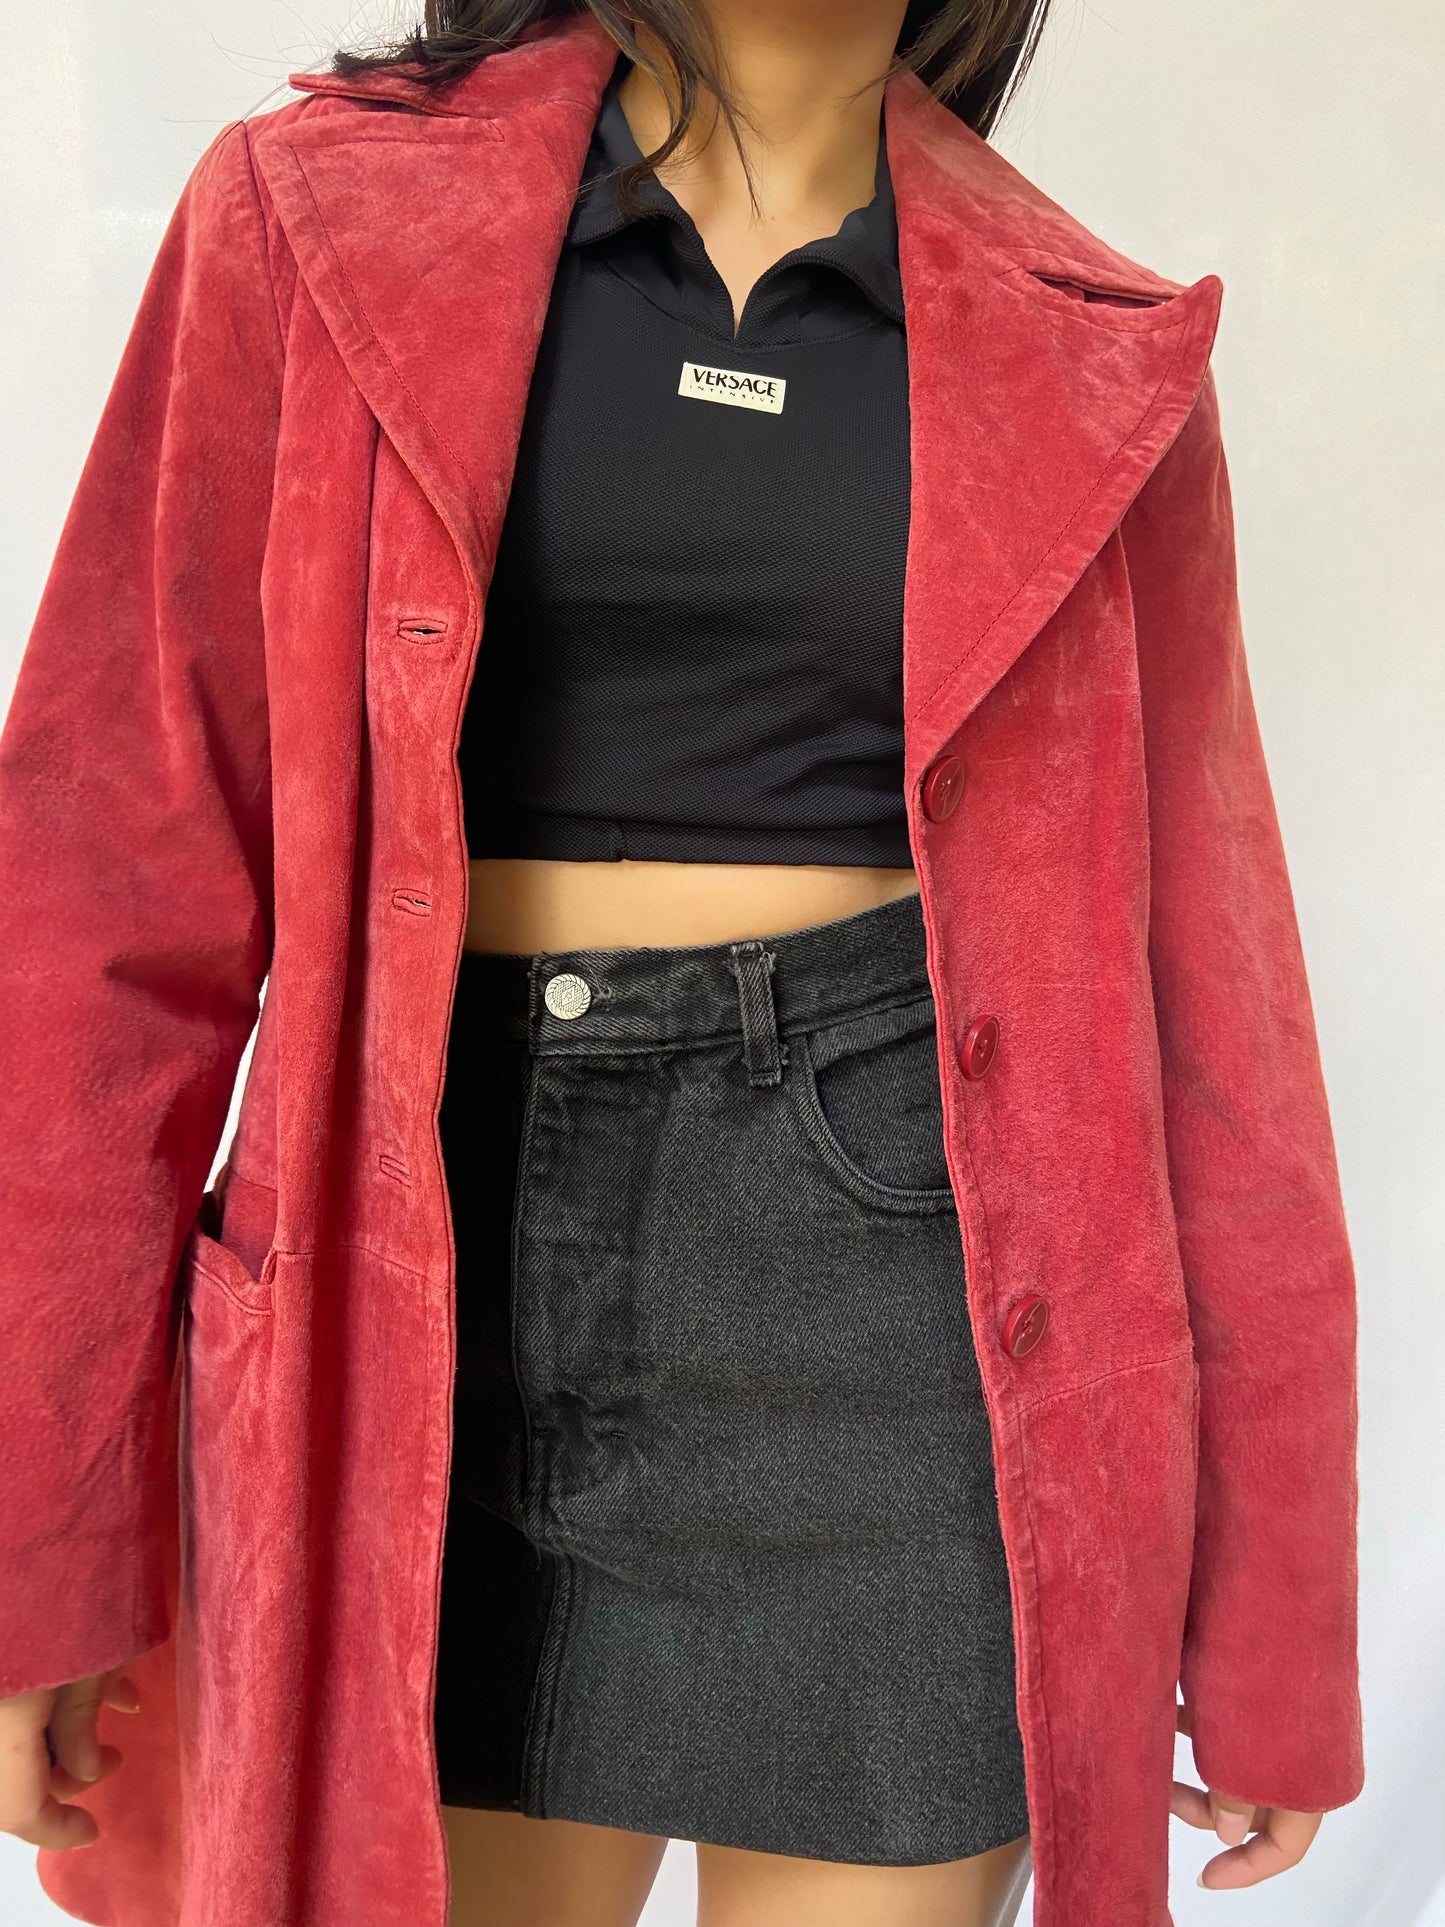 Red Suede Newport News Jacket - M/L